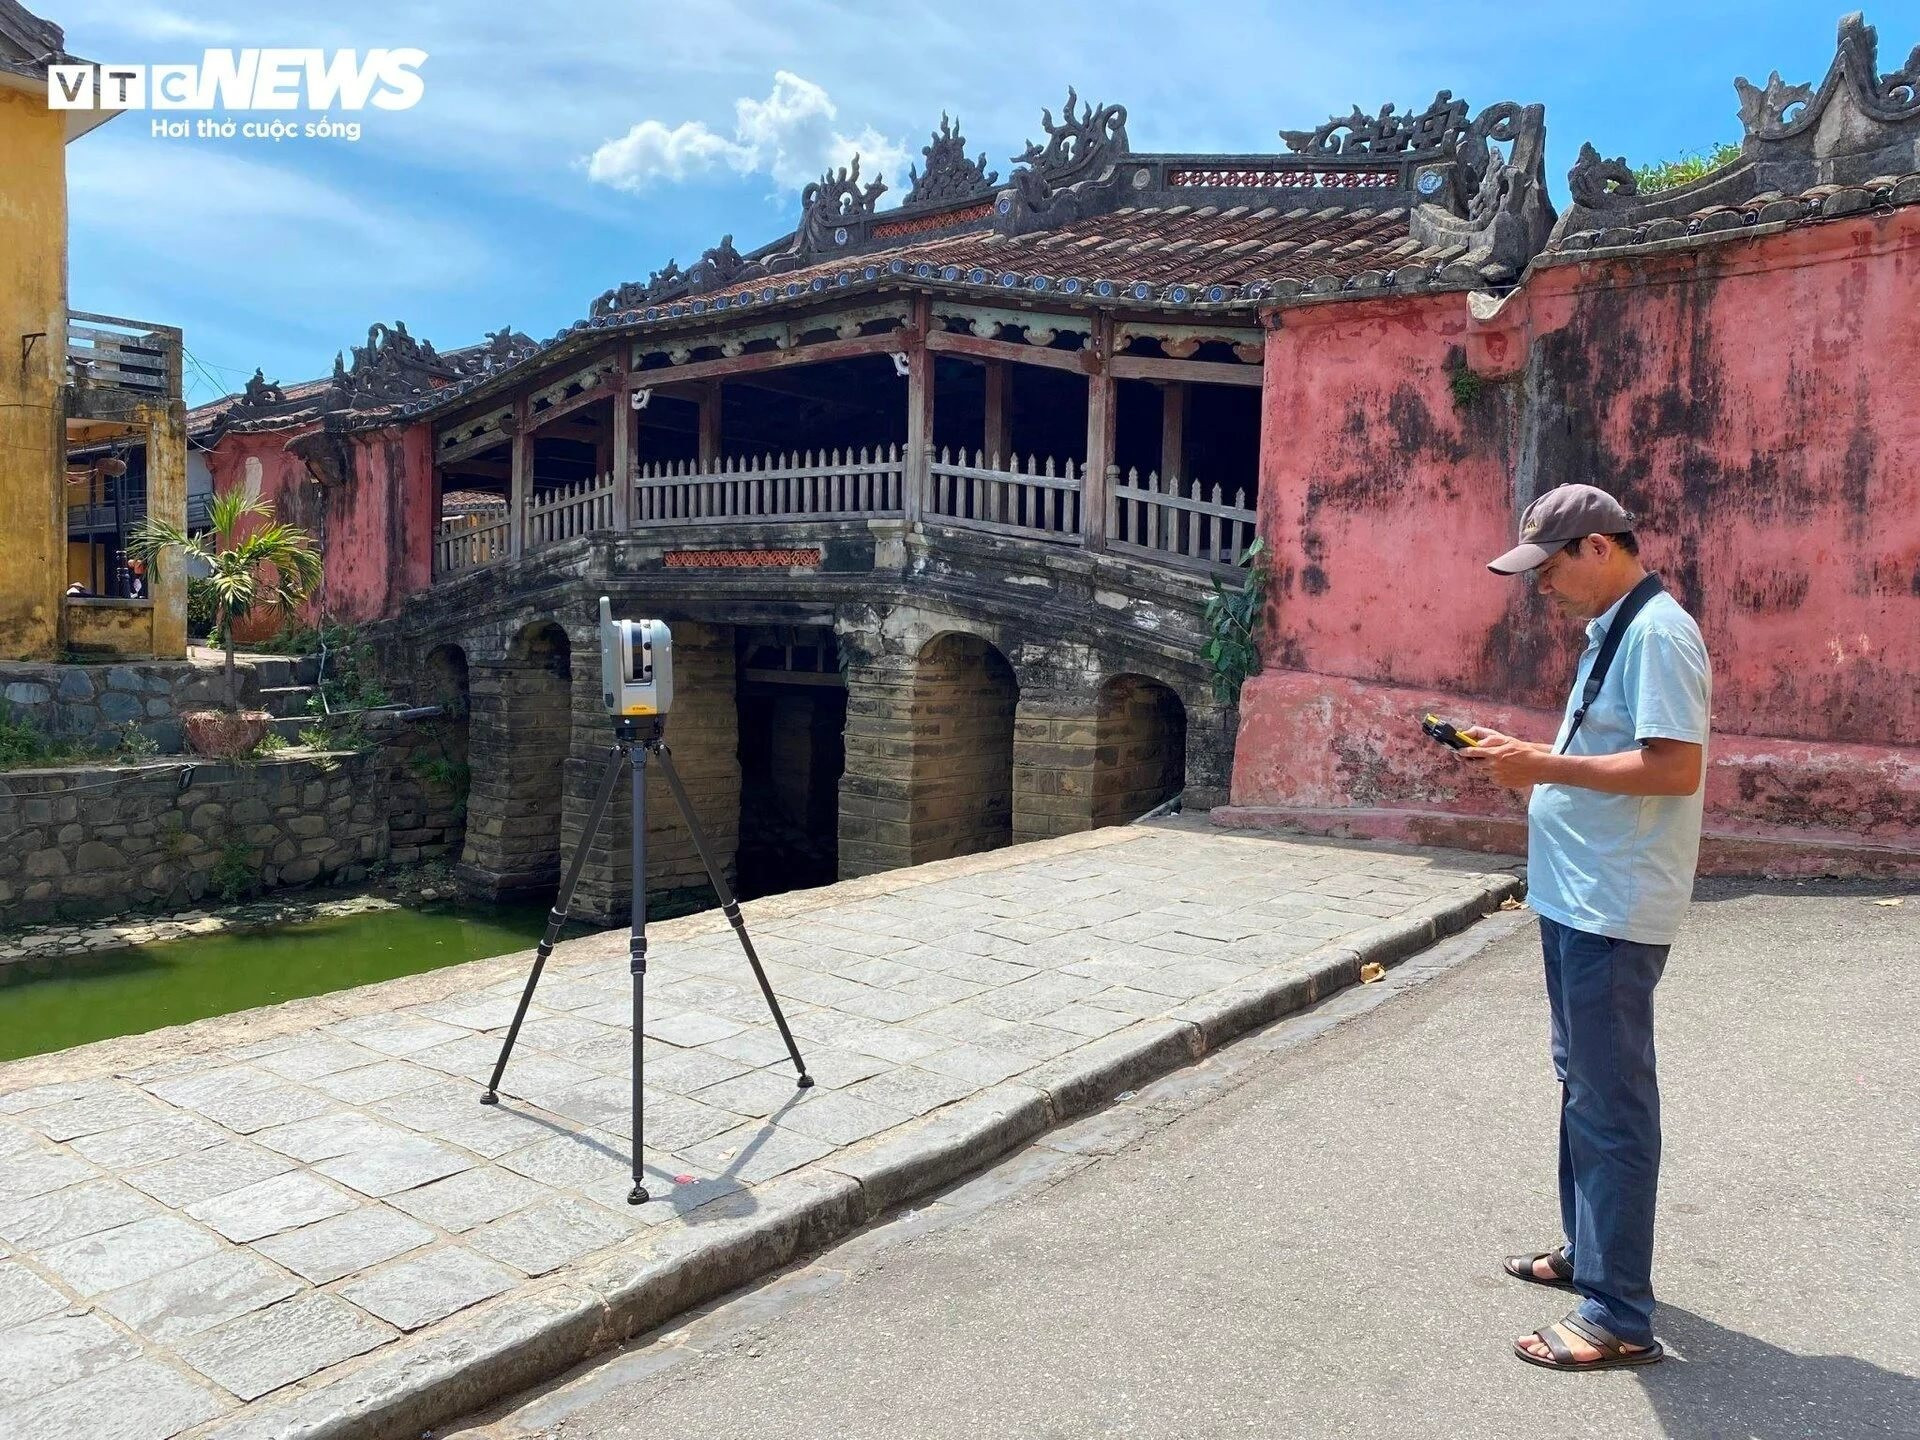 Reportedly, the Japanese Covered Bridge was built in Hoi An city (Quang Nam) at the beginning of the 17 century. It now becomes a symbol of the ancient town on the bank of the Hoai river.